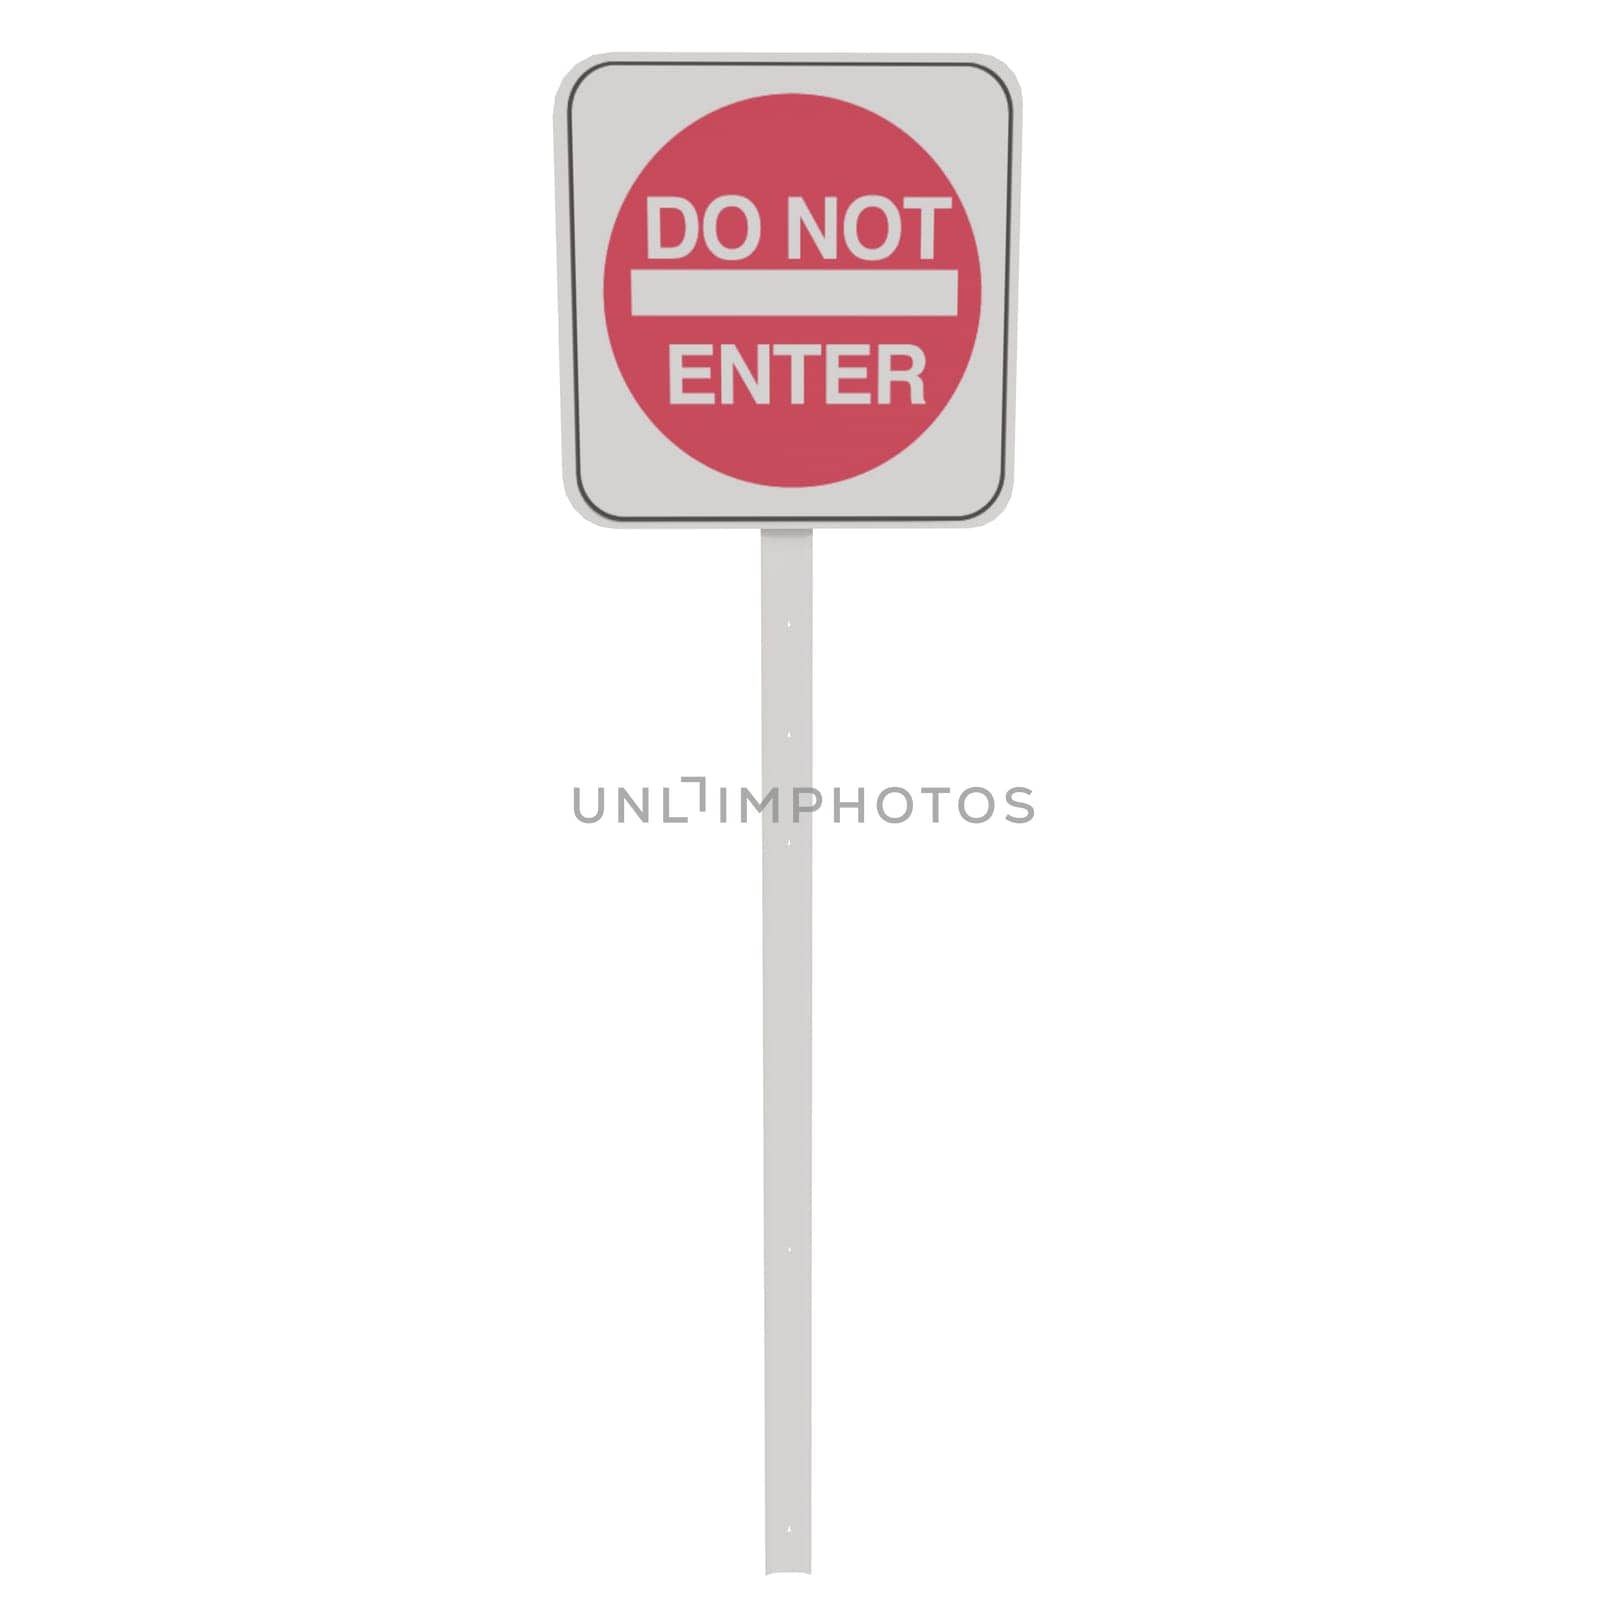 Do Not Enter Traffic Sign isolated on white background by gadreel